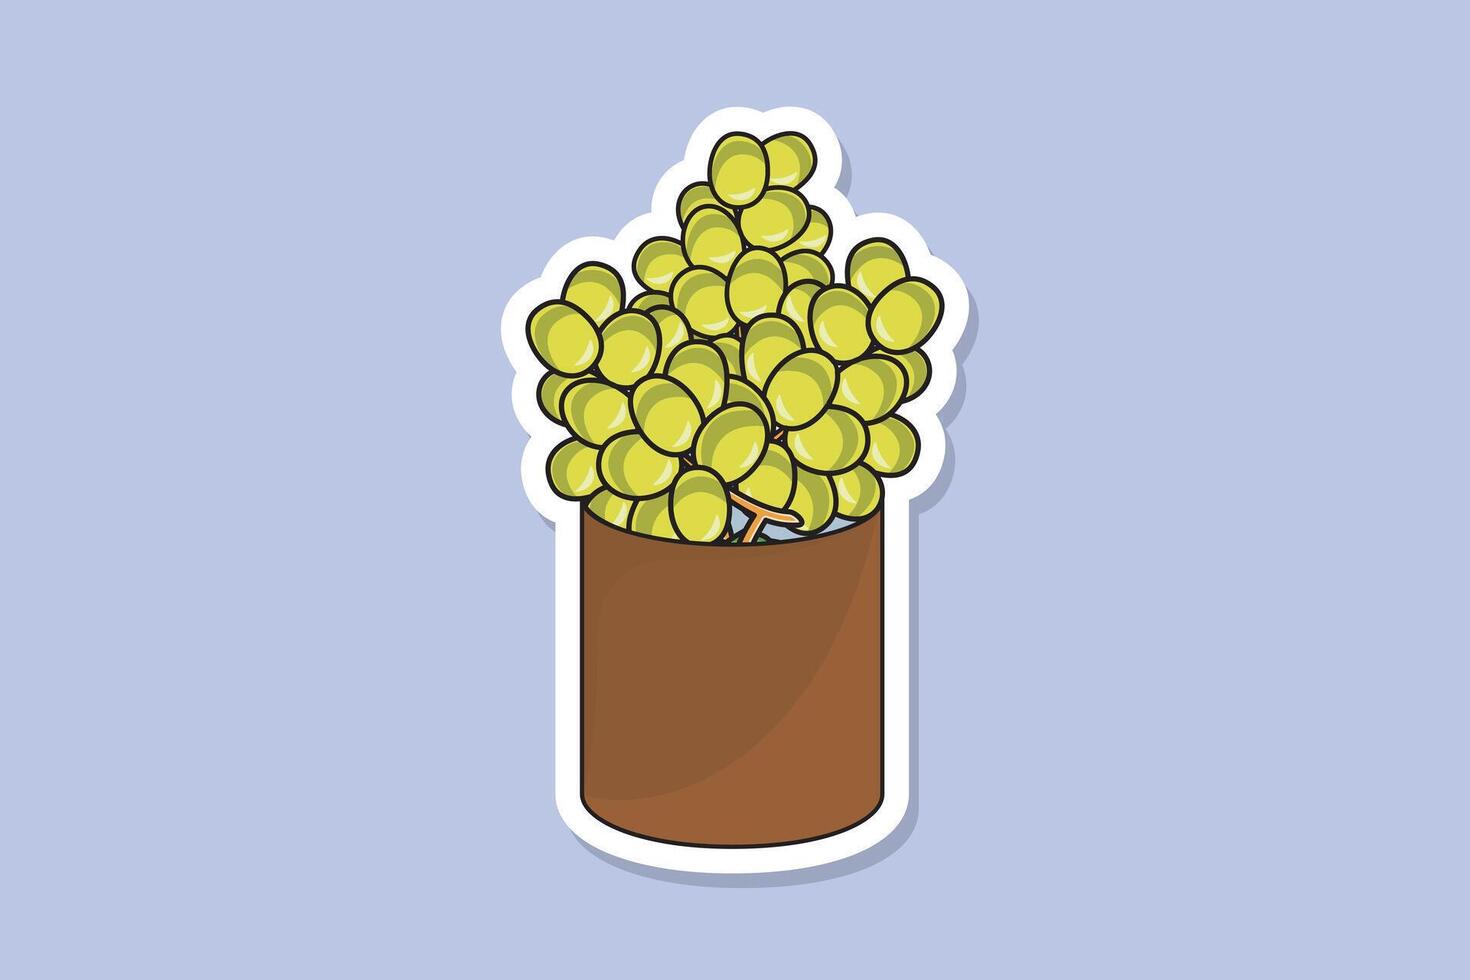 Green grapes in metal open tin can sticker design vector illustration. Food and drink objects icon concept. Green grapes sticker design logo icons.